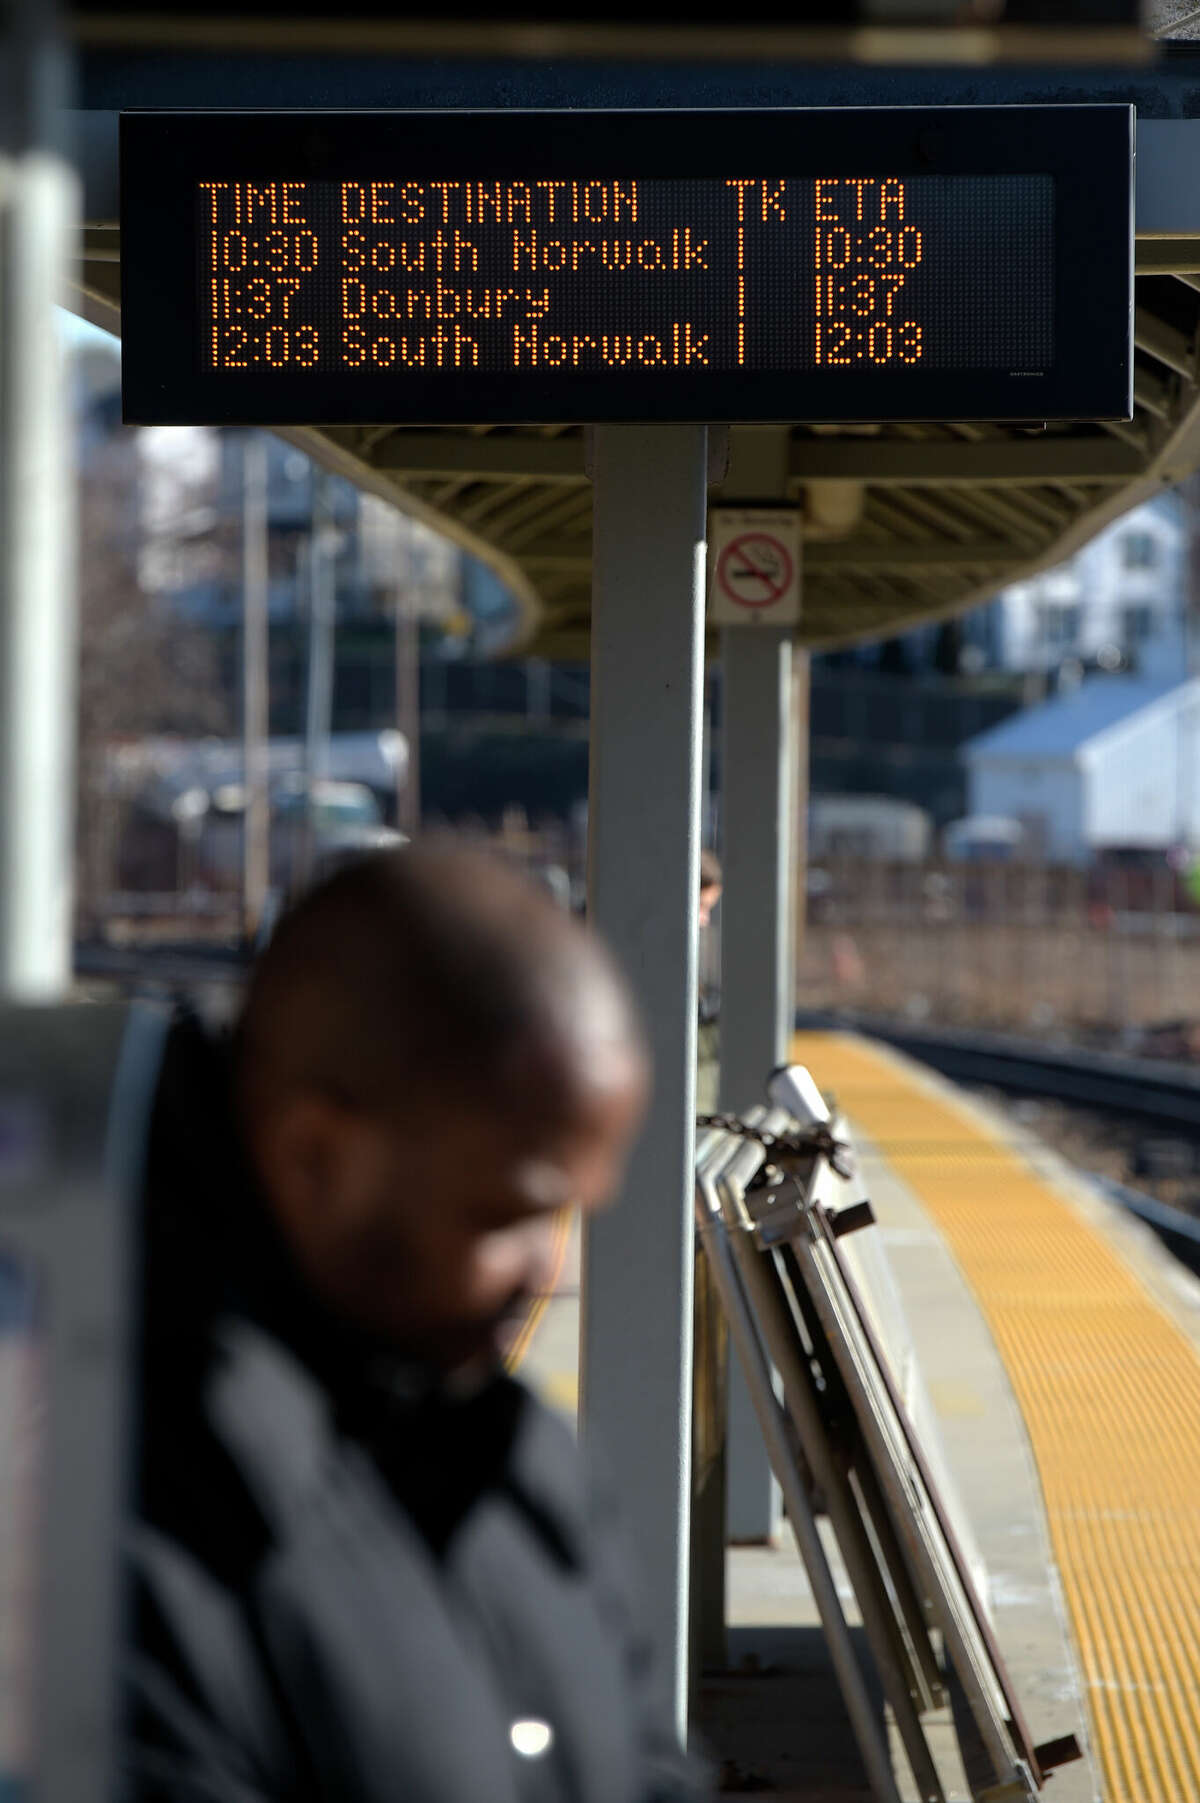 Train time are displayed at the Metro North station in Danbury. Tuesday, December 20, 2022, Danbury, Conn.